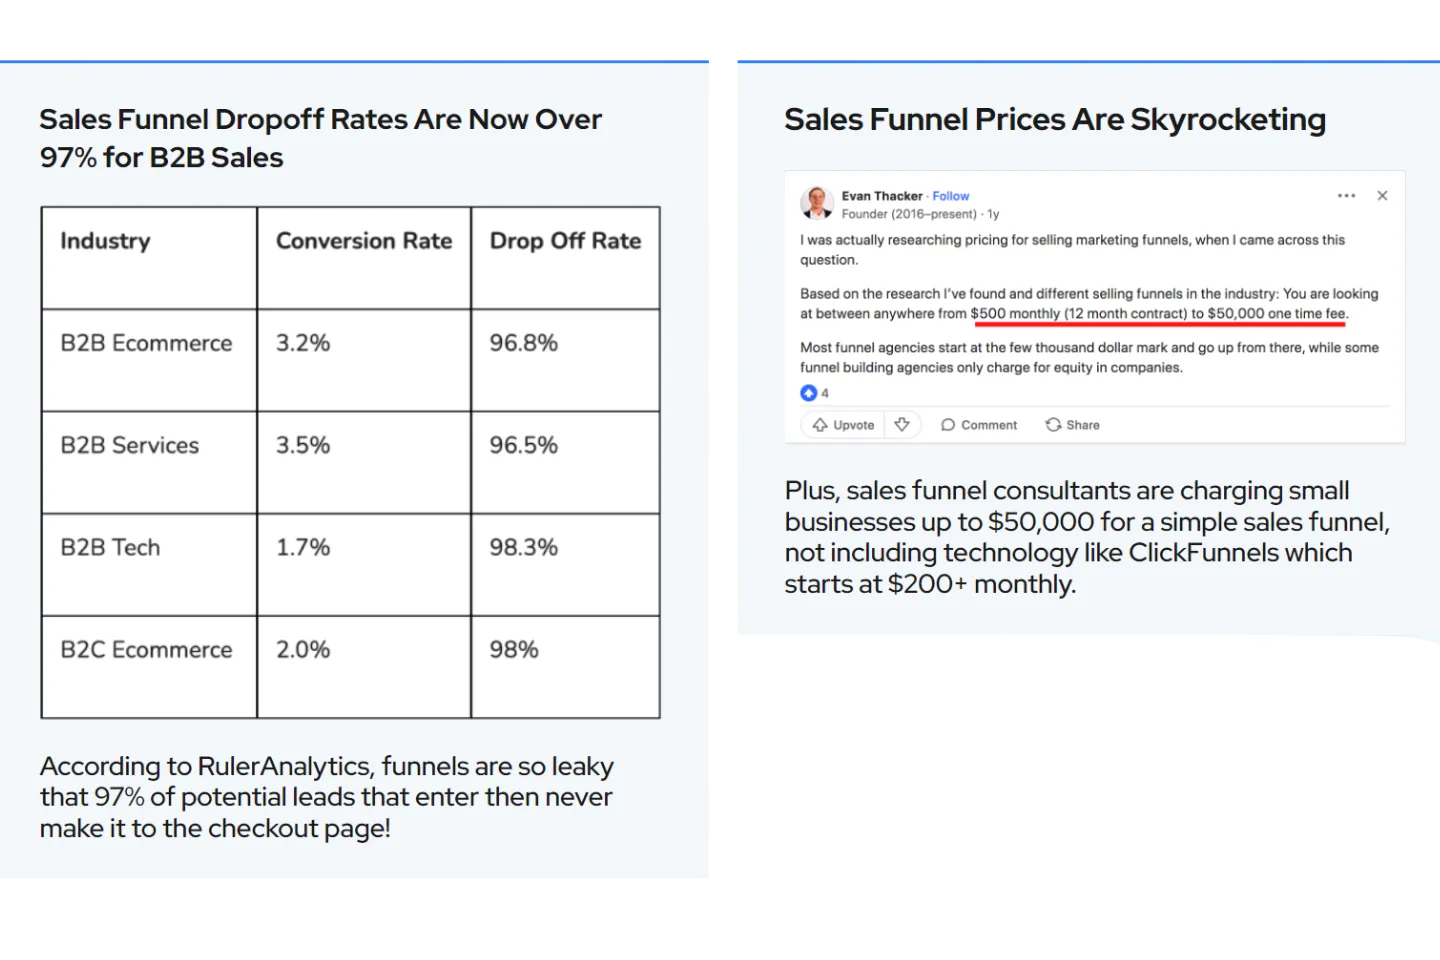 Sales Funnels are failing